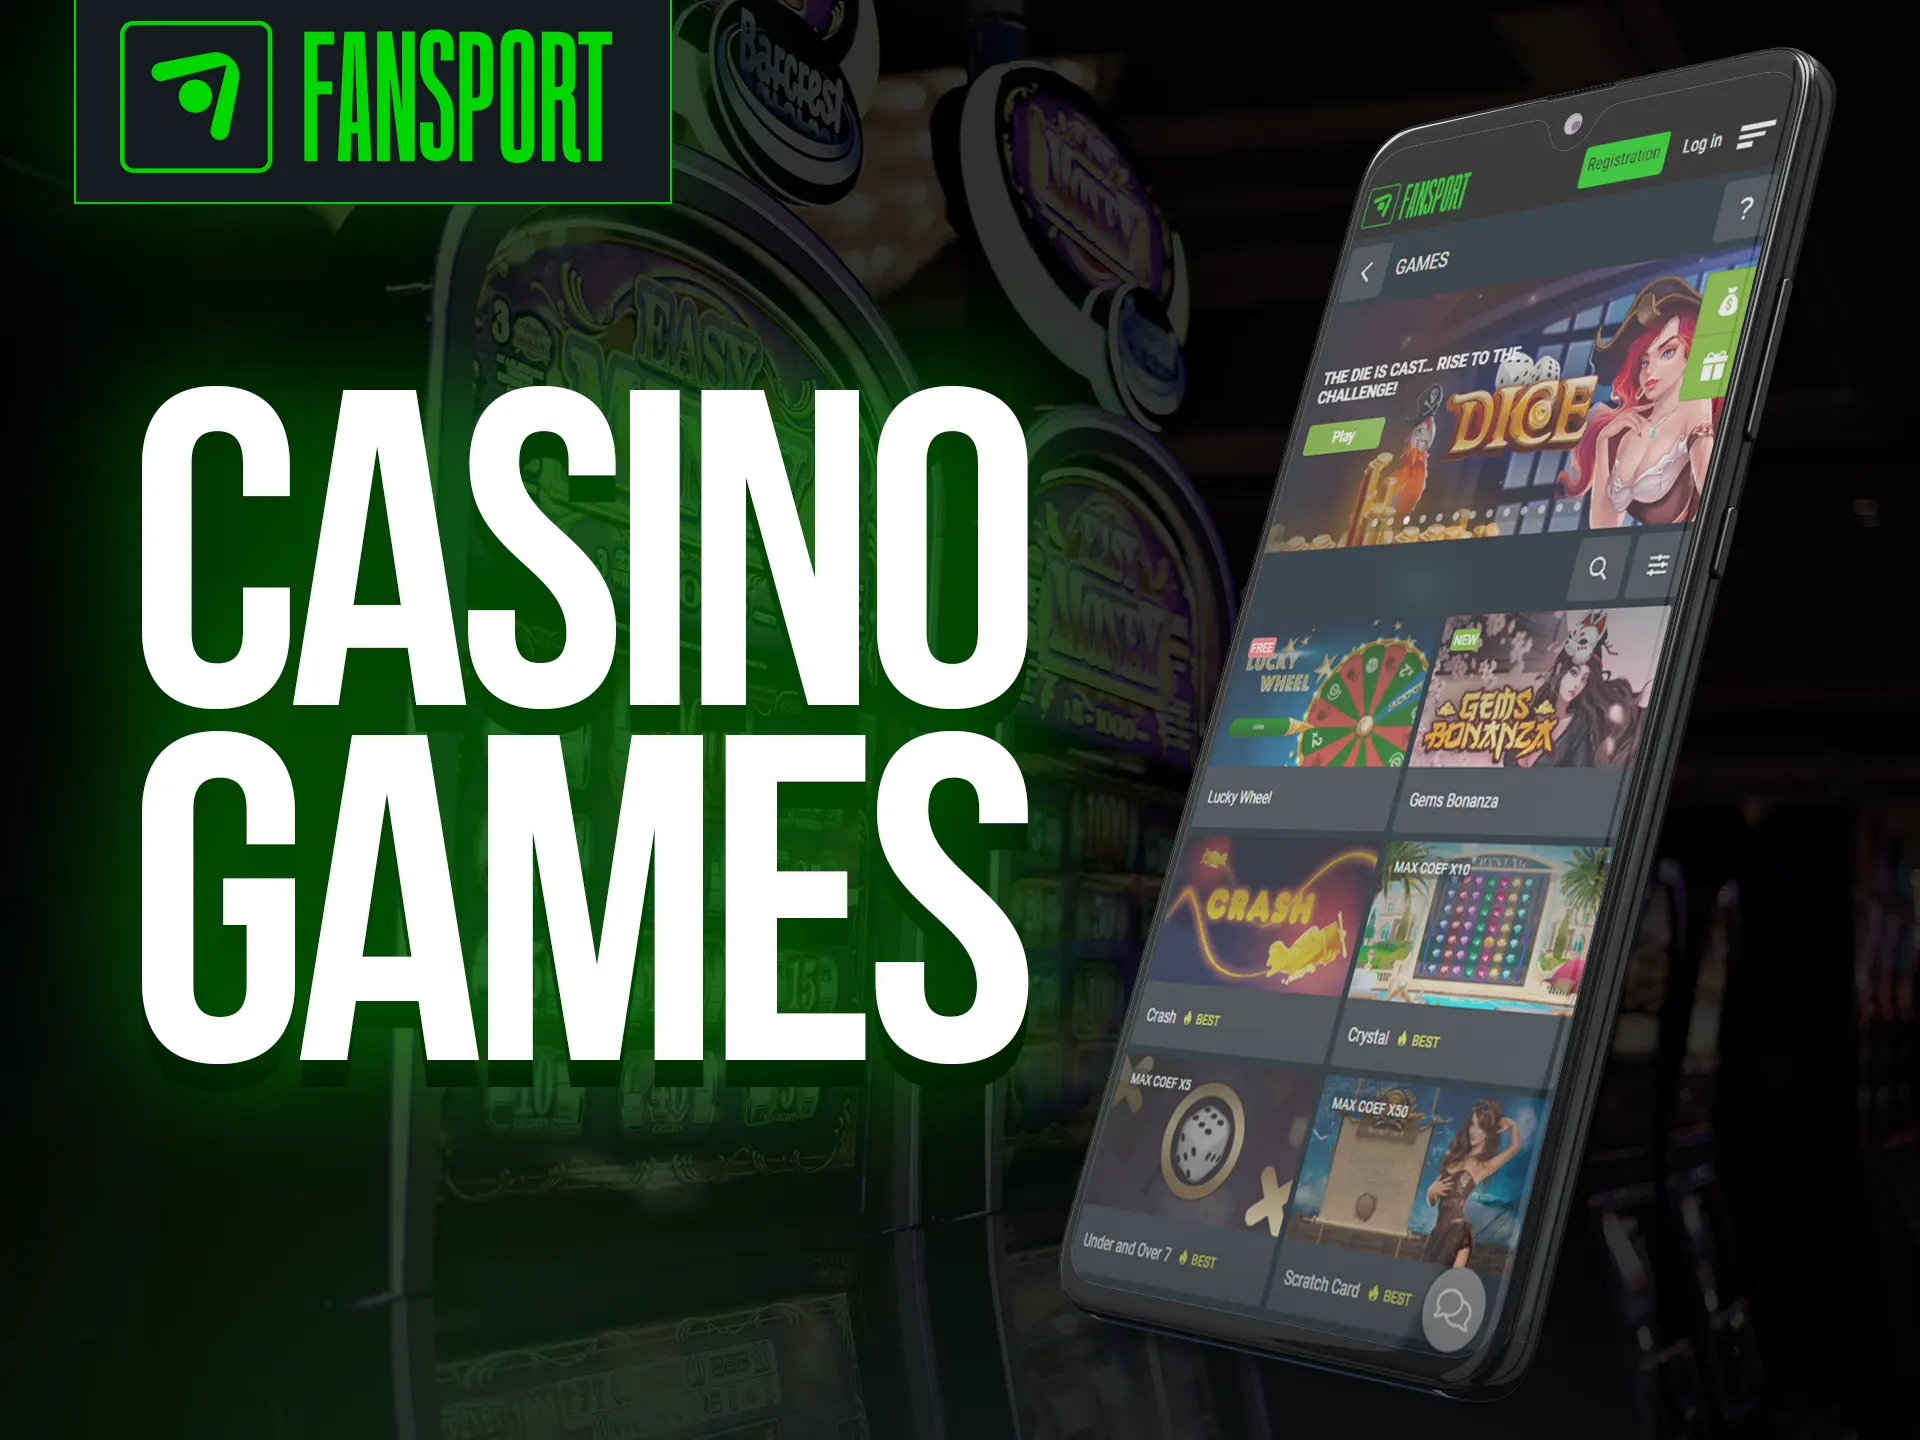 Familiarize yourself with the most popular Fansport casino games.